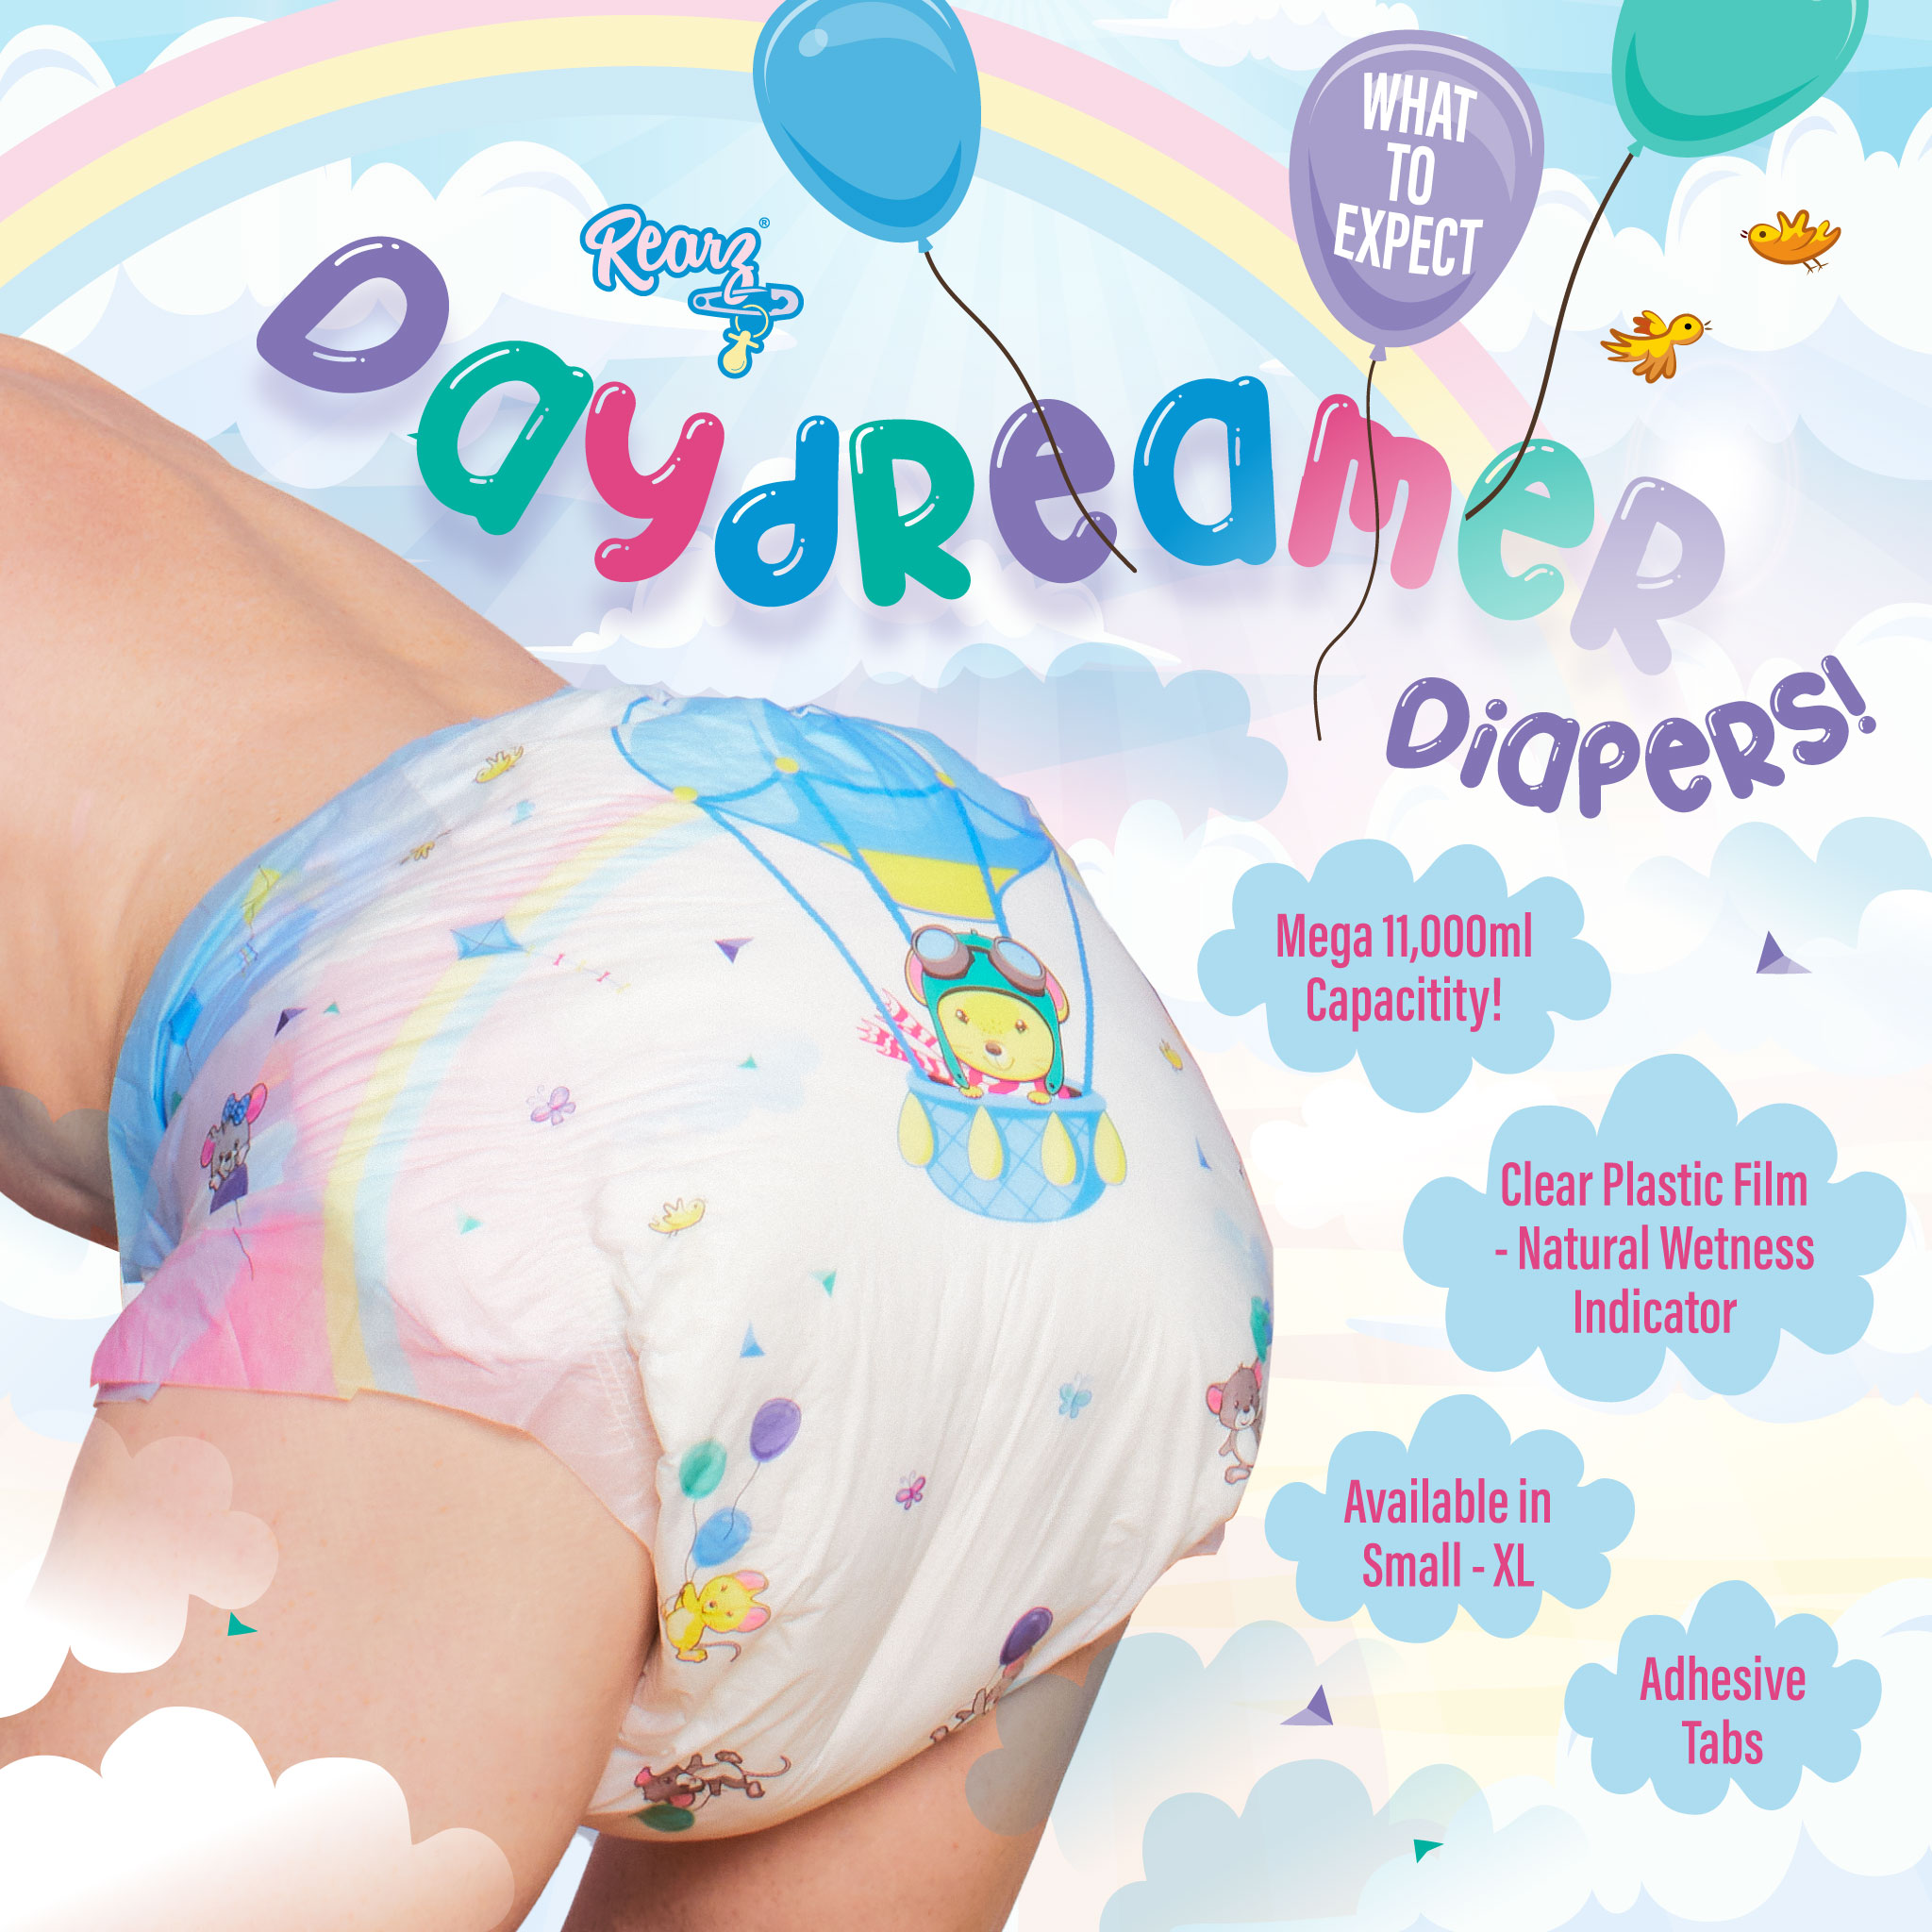 Rearz Inc on X: With the #Rearz Daydreamer diapers arriving, you will  indeed have many questions. 11,000ml capacity Small to XL 4 adhesive tabs  Clear plastic backing, natural wetness indicator. Are you